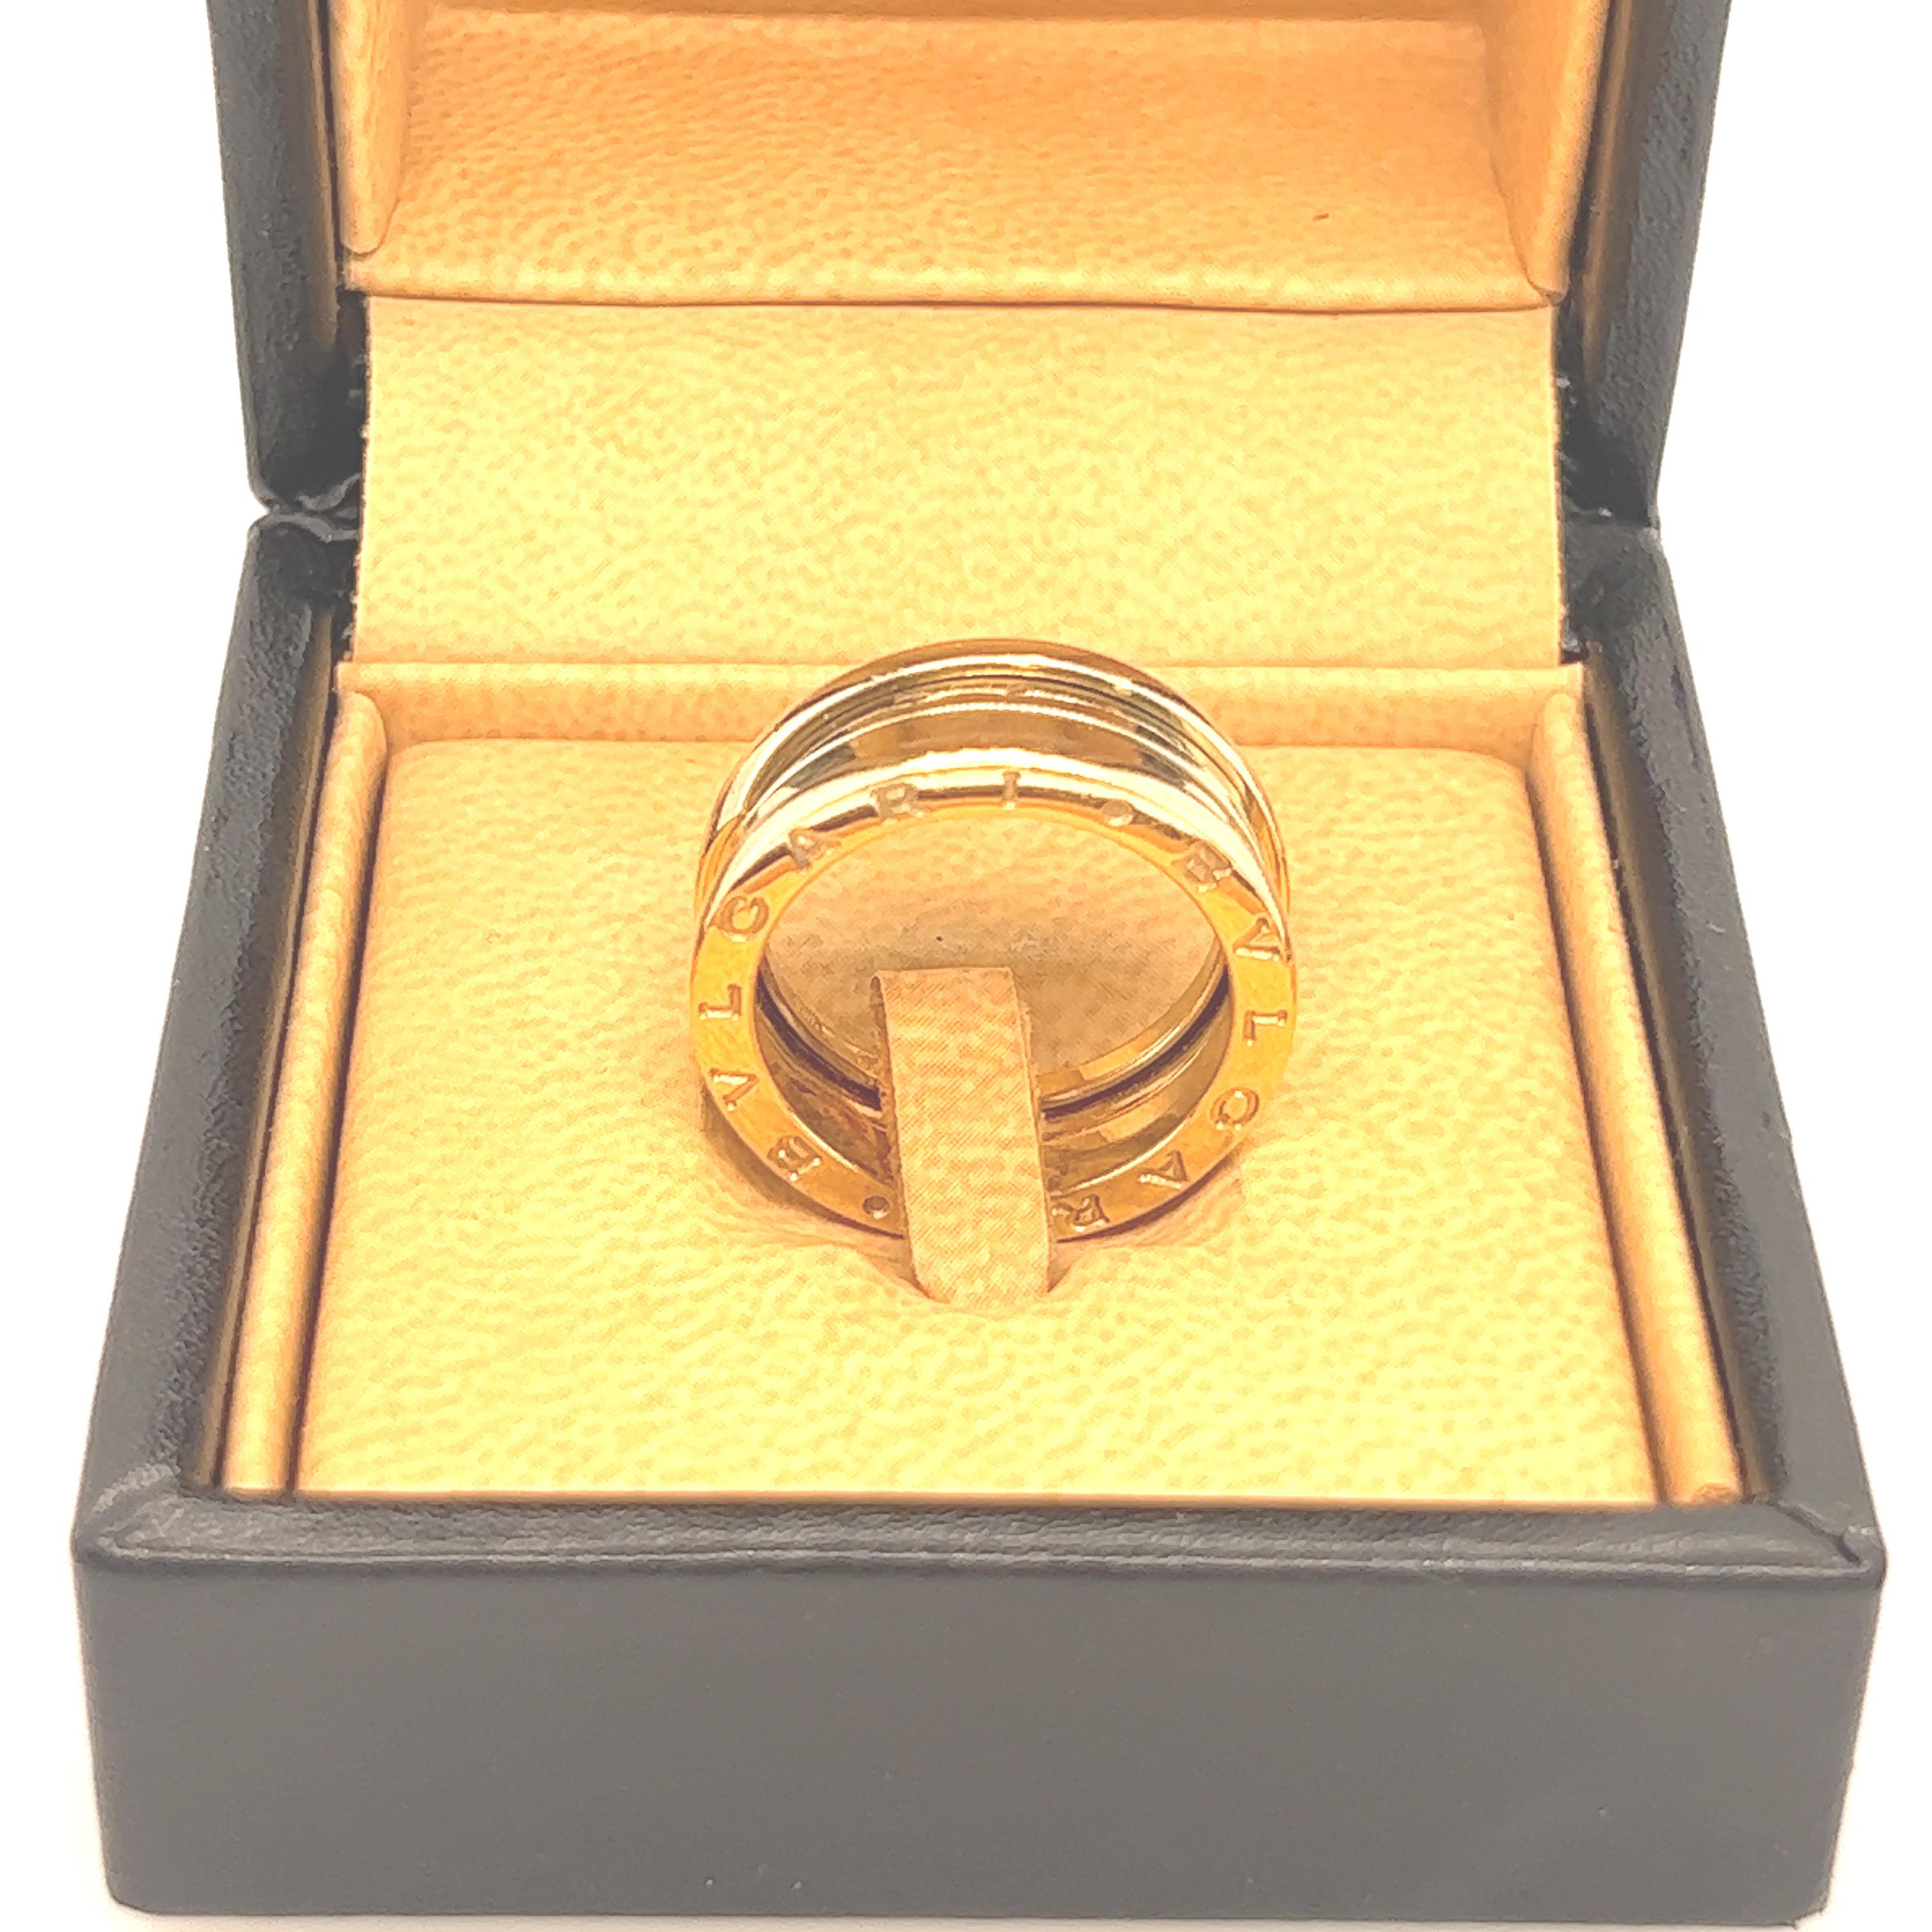 Beautiful Pre-owned Bulgari B-Zero ring, rose gold, and ode to Italian architecture, taking inspiration from the famous Colosseum. A Classic and elegant ring suitable for daily wear.

The purity of its distinctive spiral design, is a metaphor for